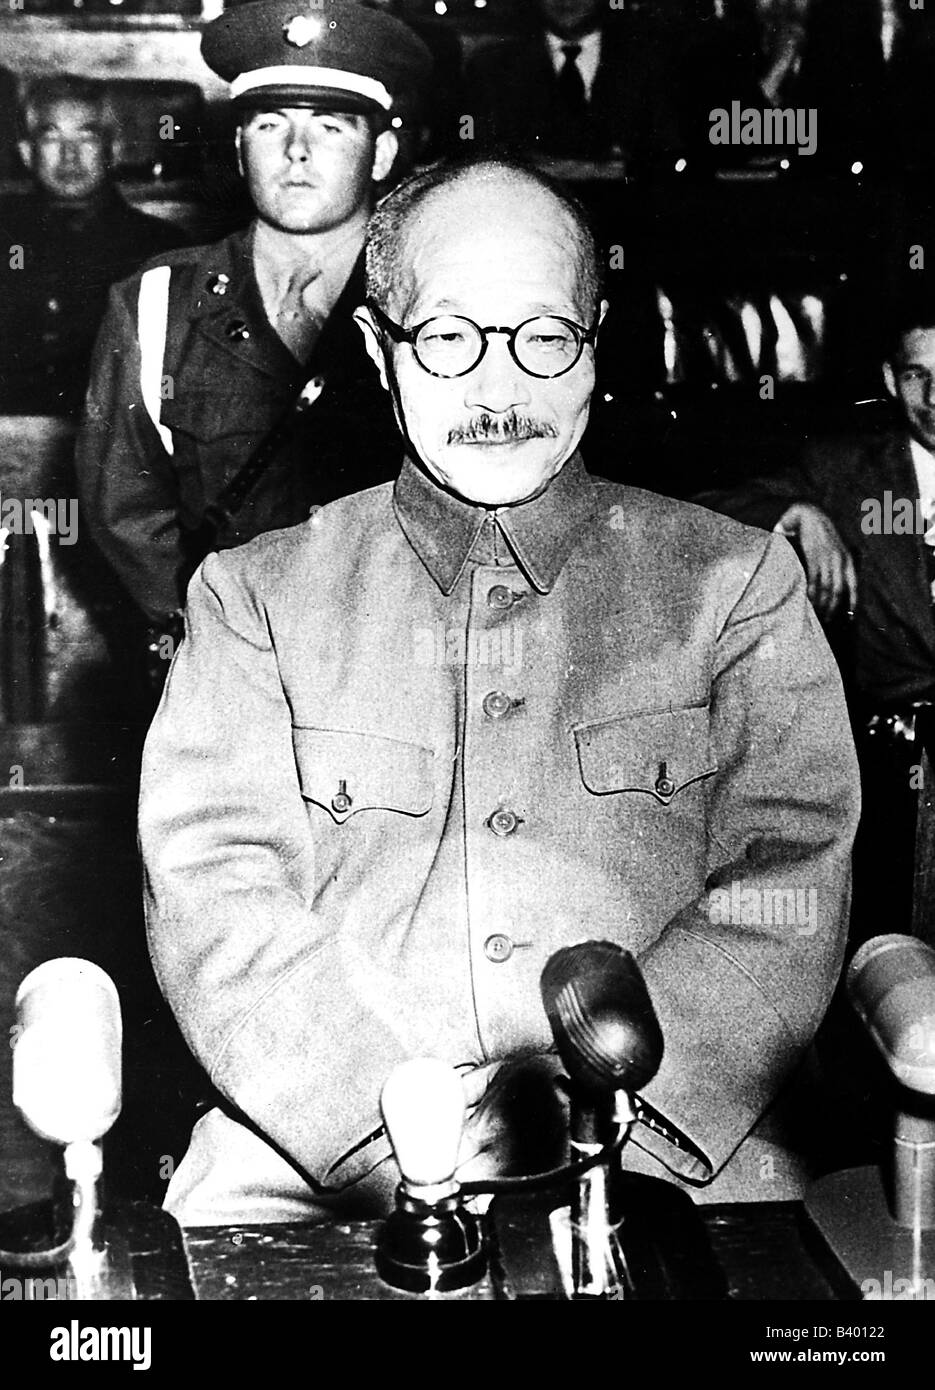 Tojo, Hideki, 30.12.1884 - 23.12.1948, Japanese general and politician, sitting in the dock, during International Military Tribunal for the Far East, Tokyo, 12.11.1948, Stock Photo